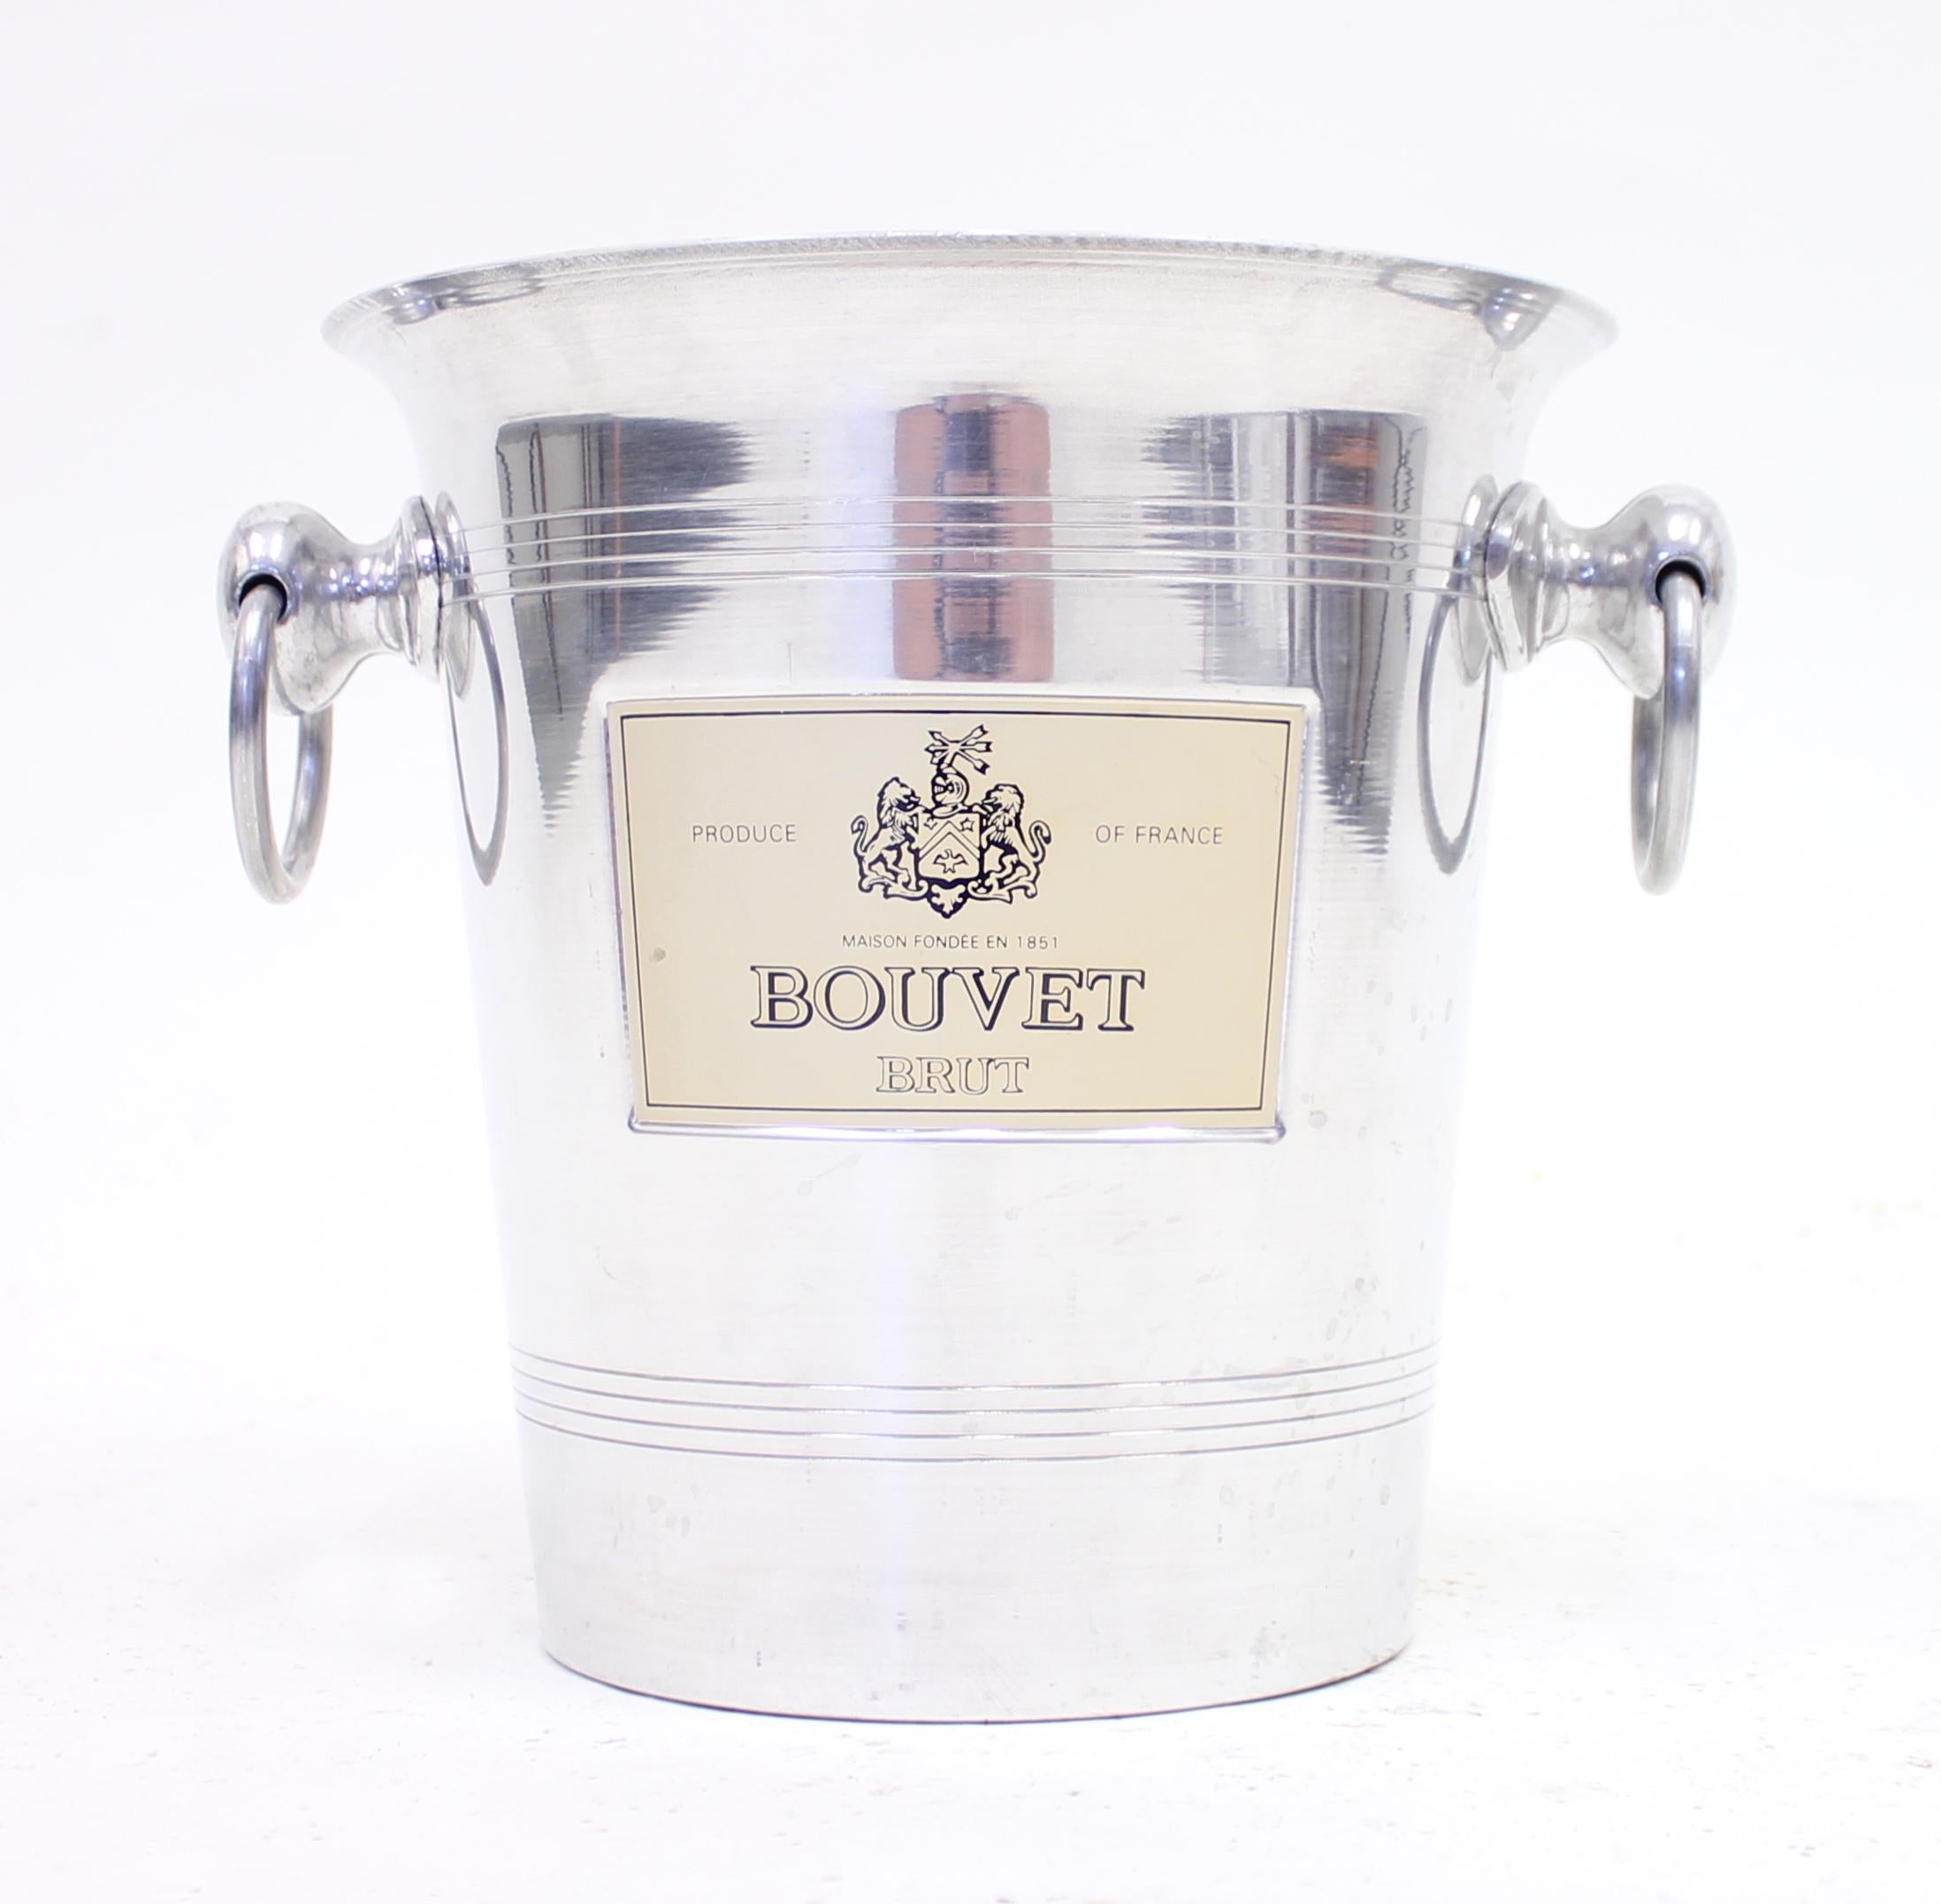 Vintage French Bouvet Brut wine cooler in chromed metal, late 20th century. Good vintage condition with normal ware consistent with age and use including a few scratches and marks.